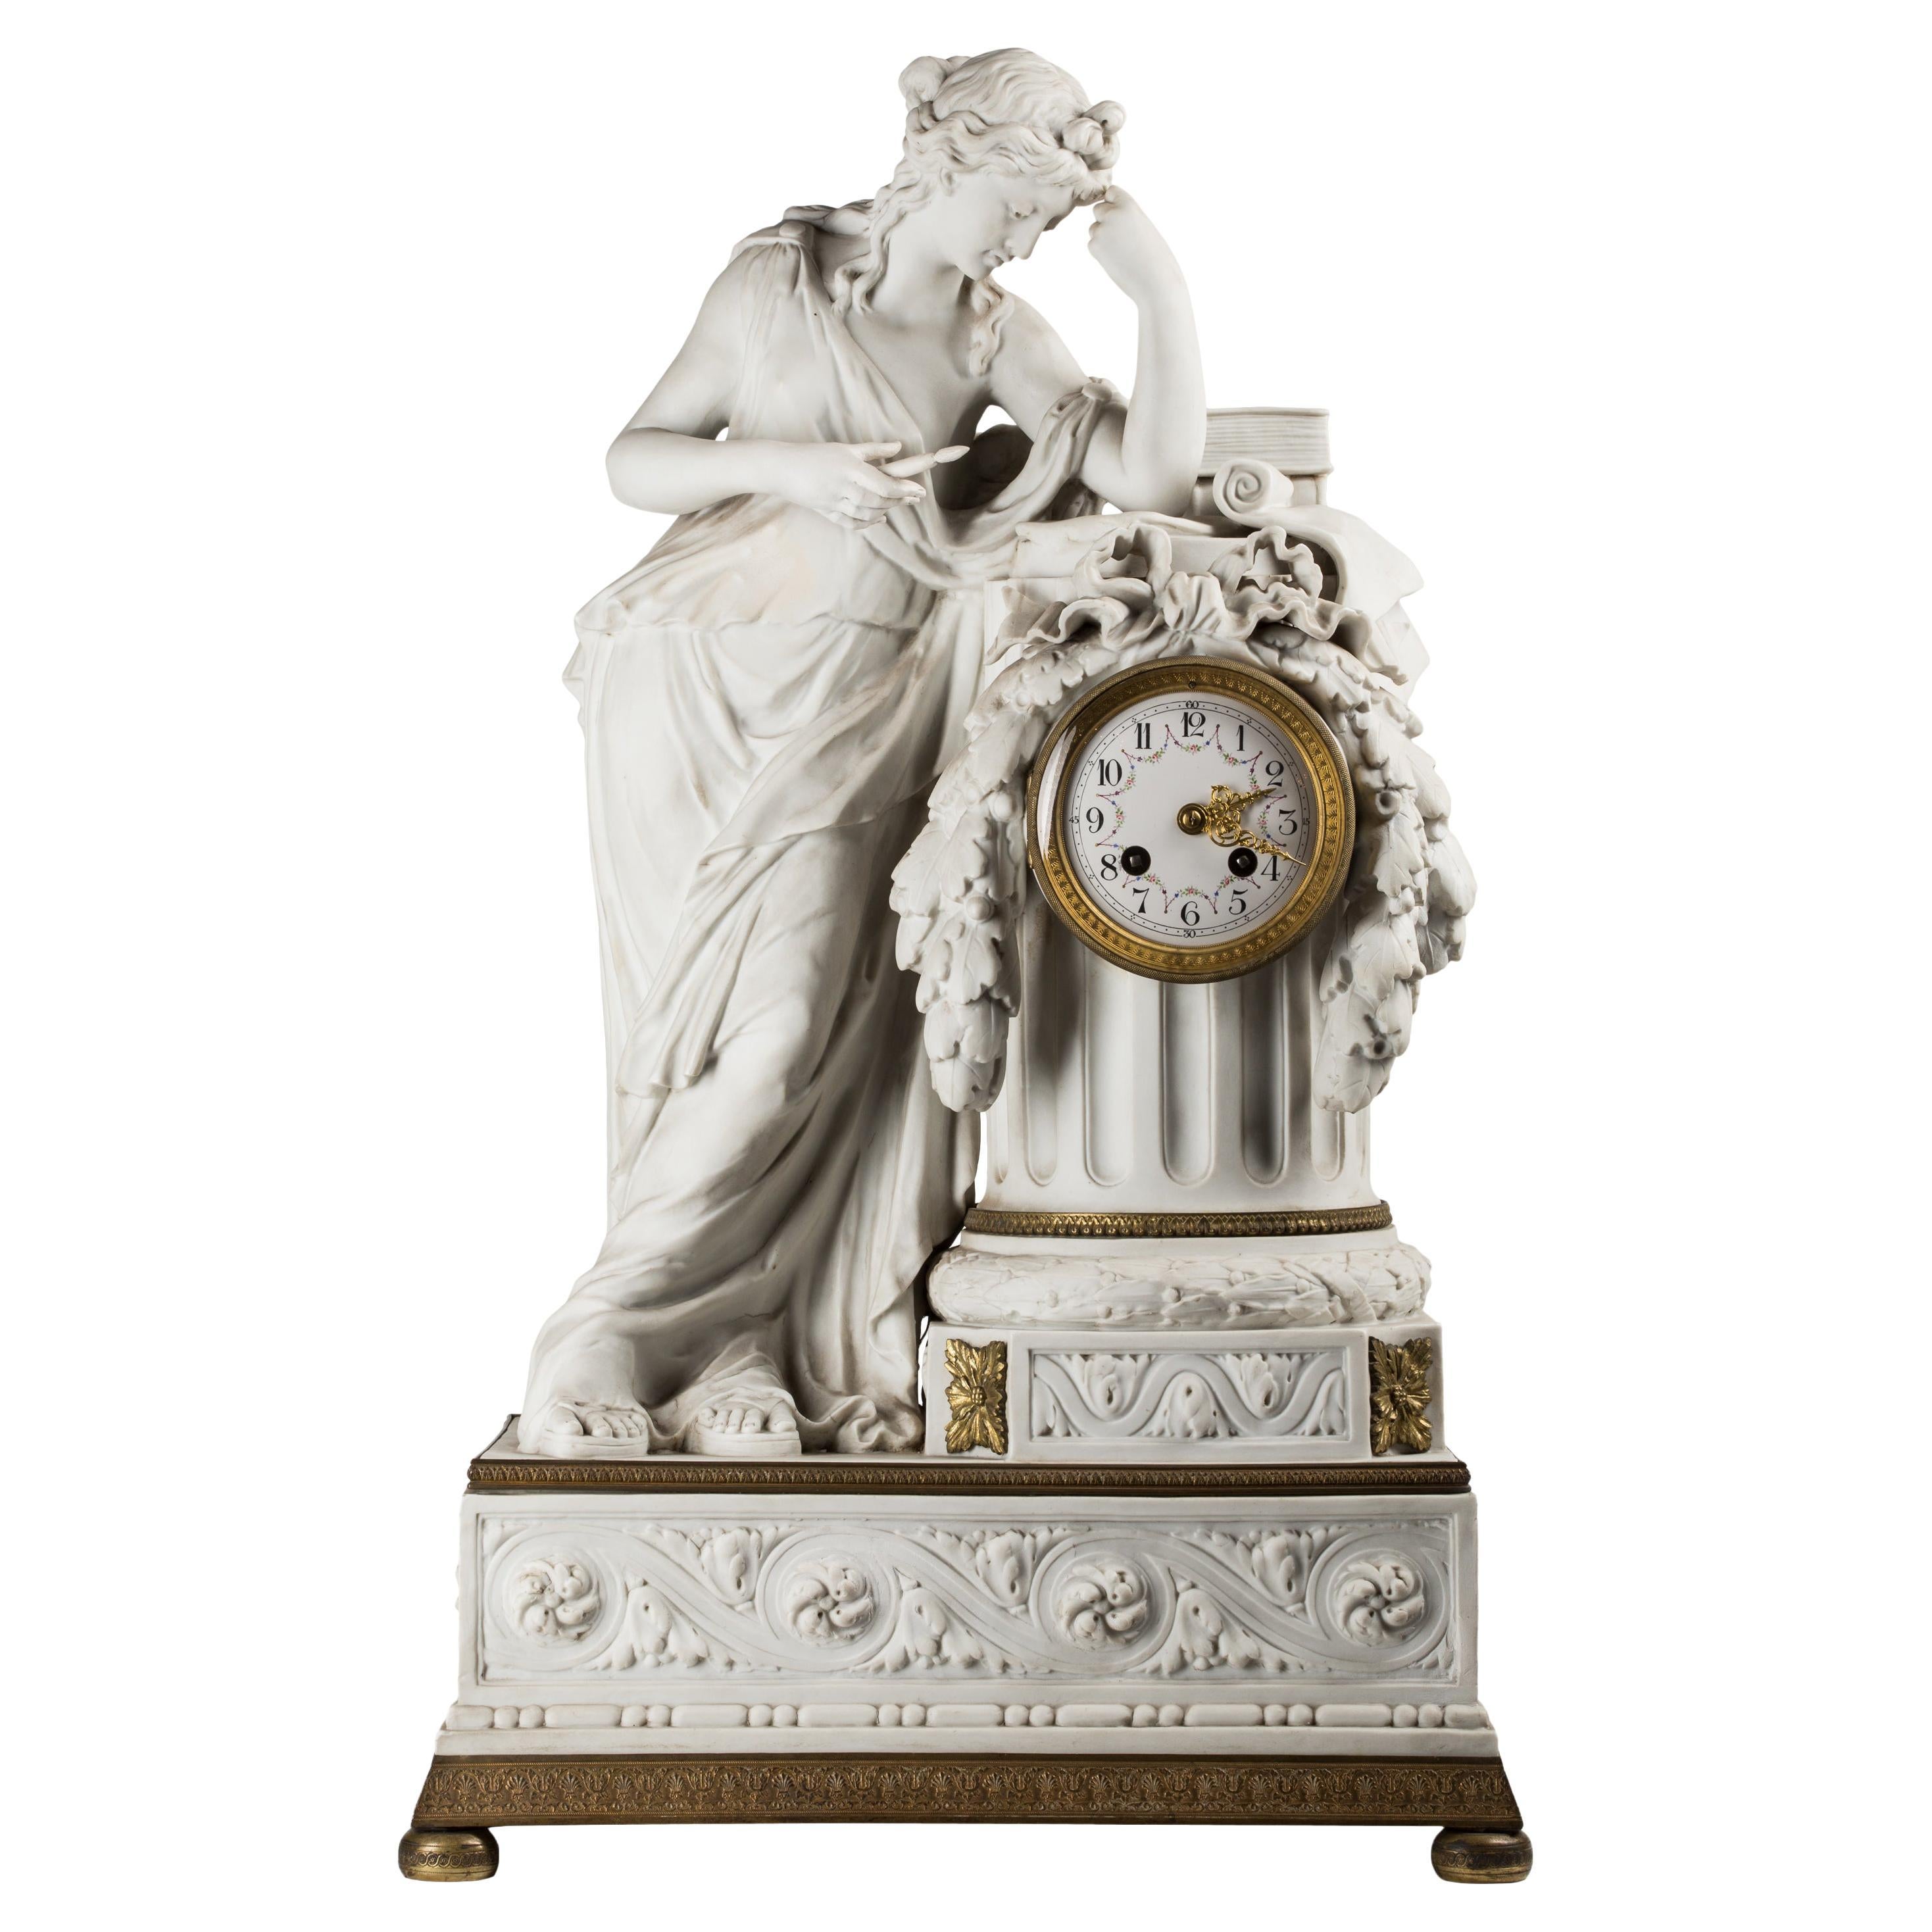 19th Century French Neoclassical Bisque Porcelain Mantel Clock with Muse Clio